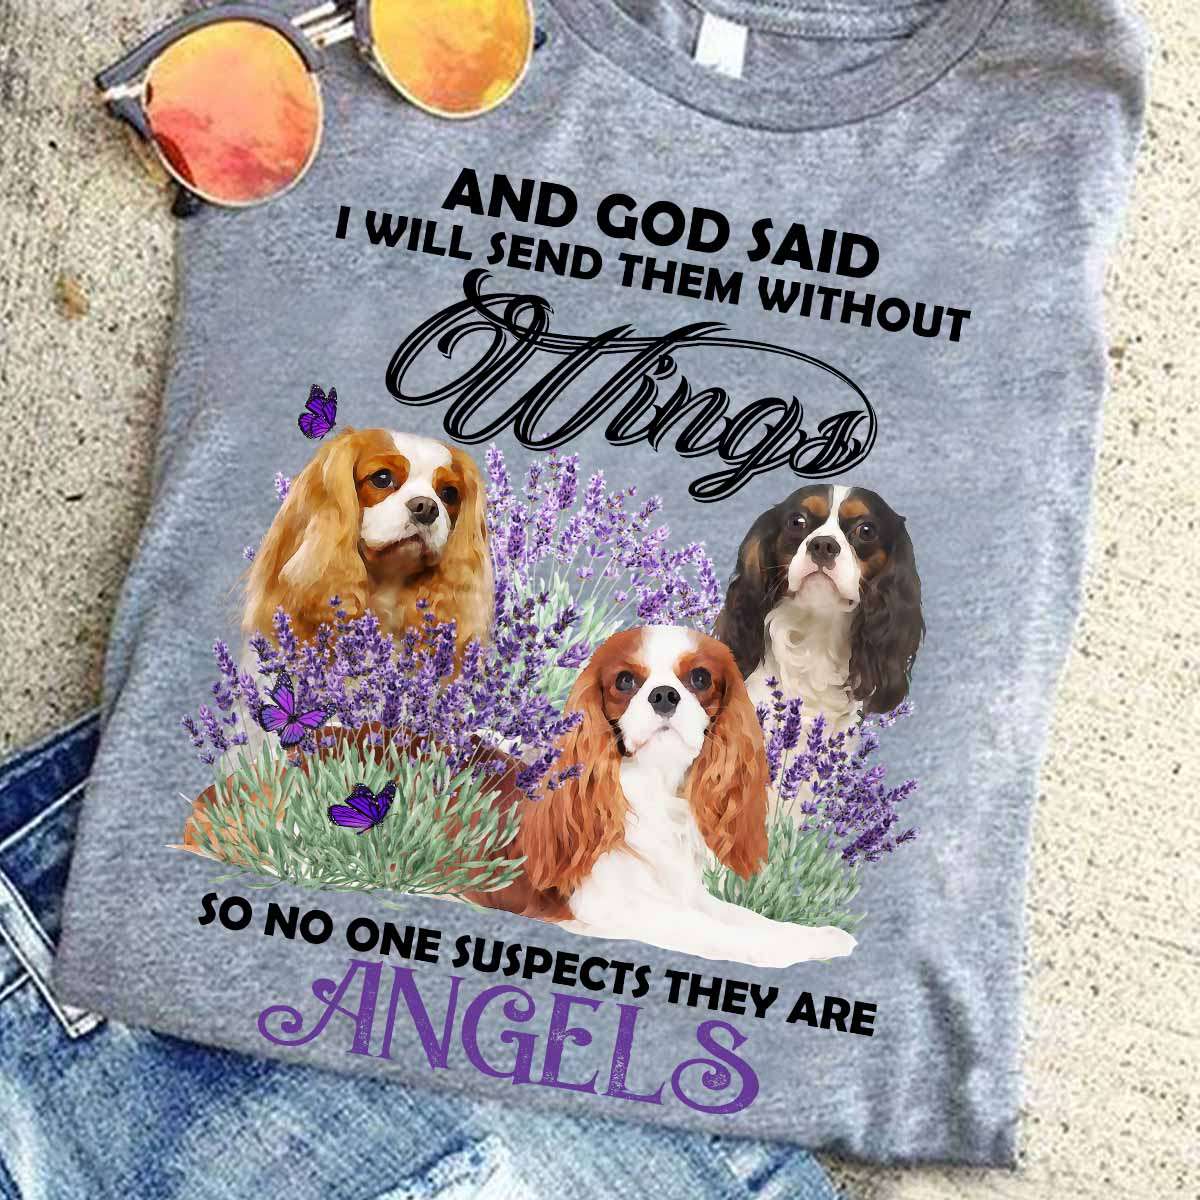 Cavalier King Charles Spaniel - And god said i will send them without wings so no one suspects they are angles